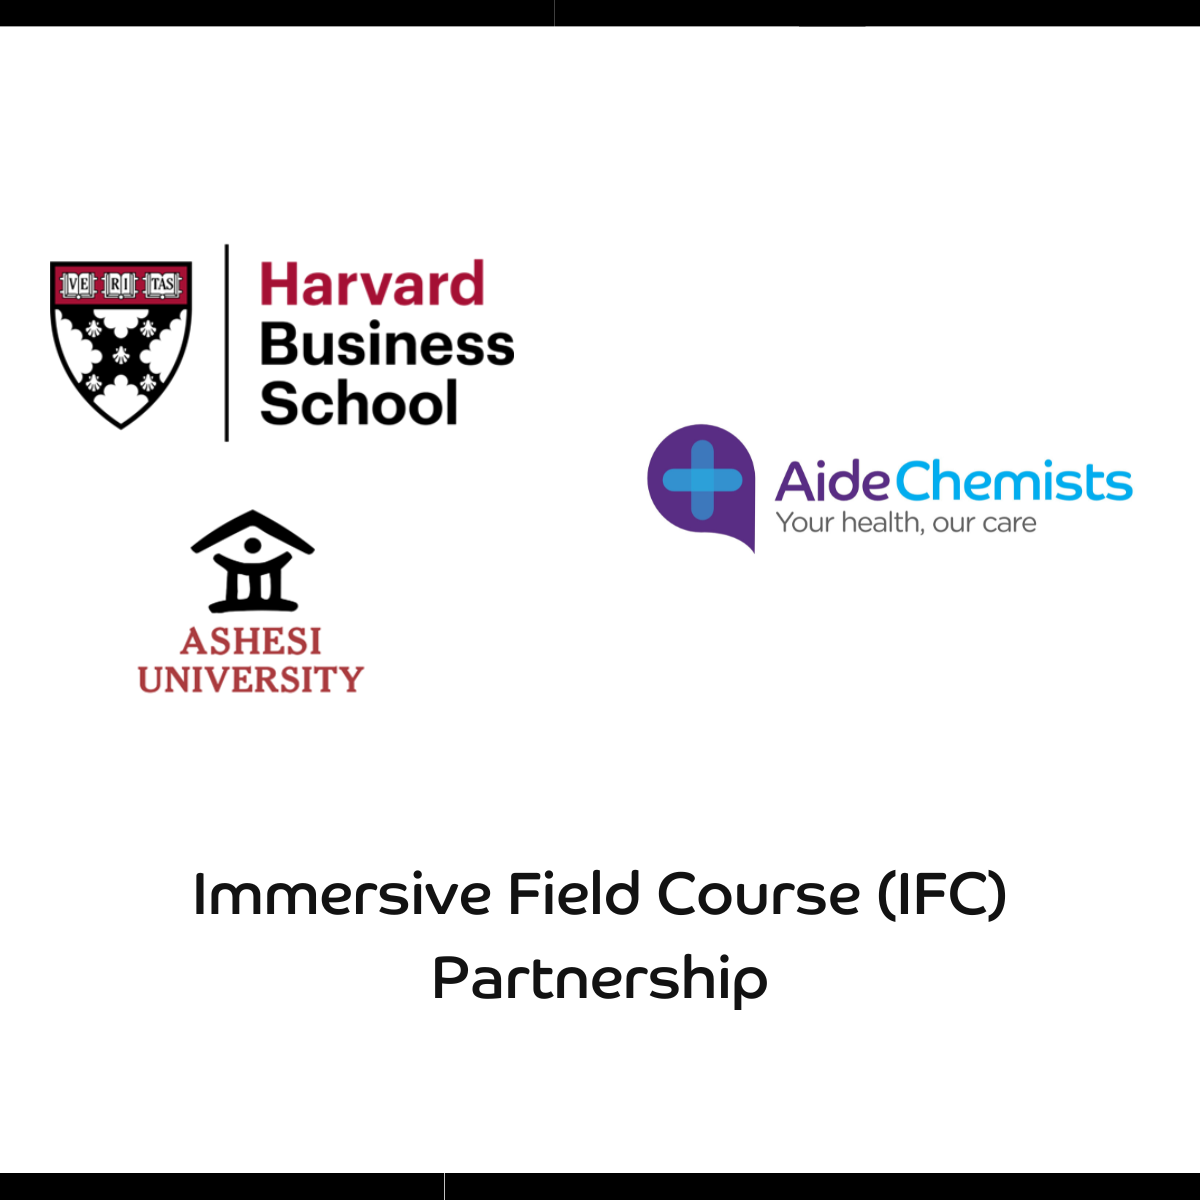 Harvard Business School selects Aide Chemists as host for immersive field course in Ghana